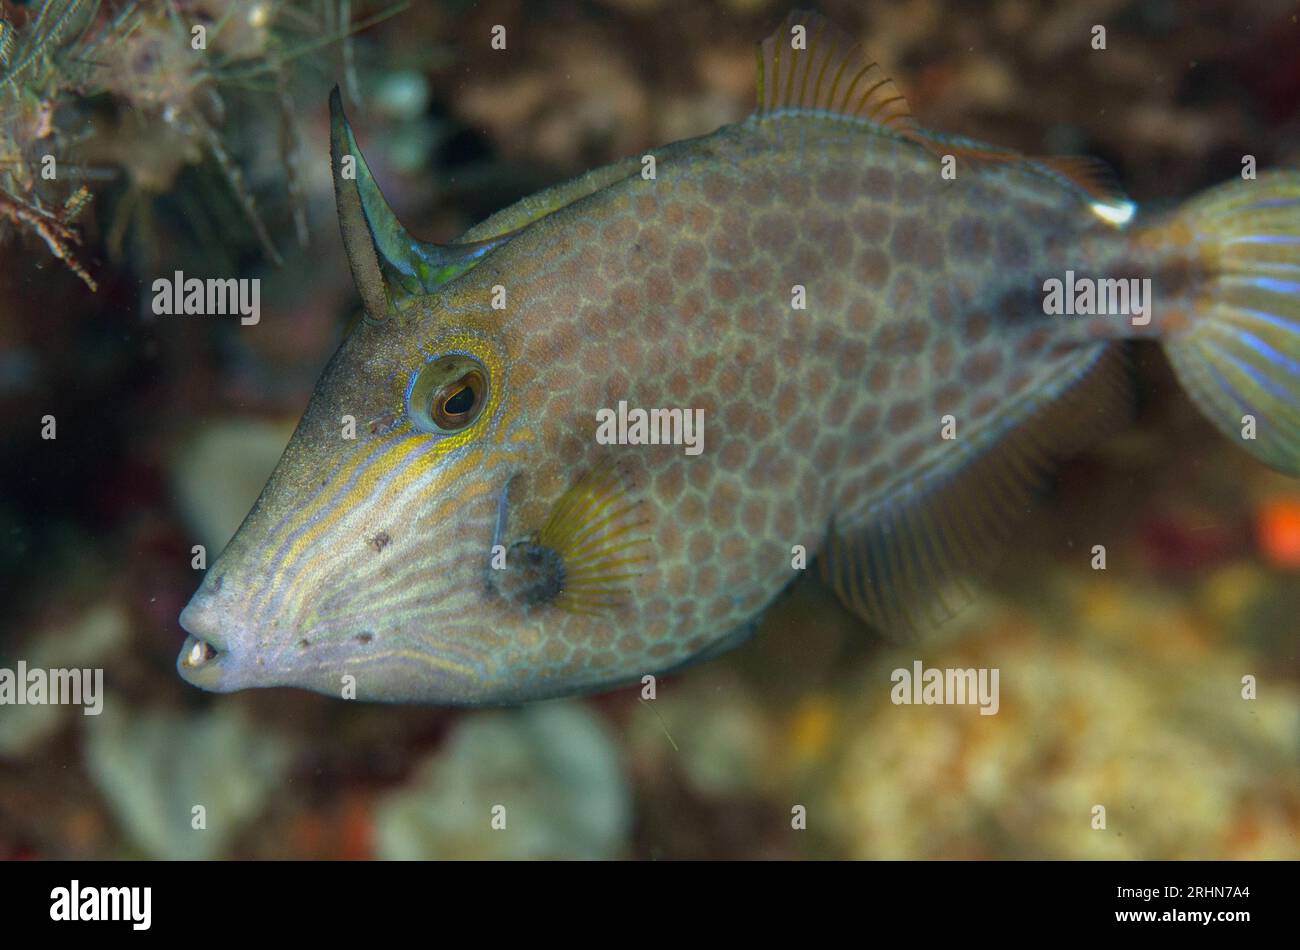 Wirenet Filefish, Cantherhines pardalis, with extended dorsal fin trigger, Nudi Falls dive site, Lembeh Straits, Sulawesi, Indonesia Stock Photo